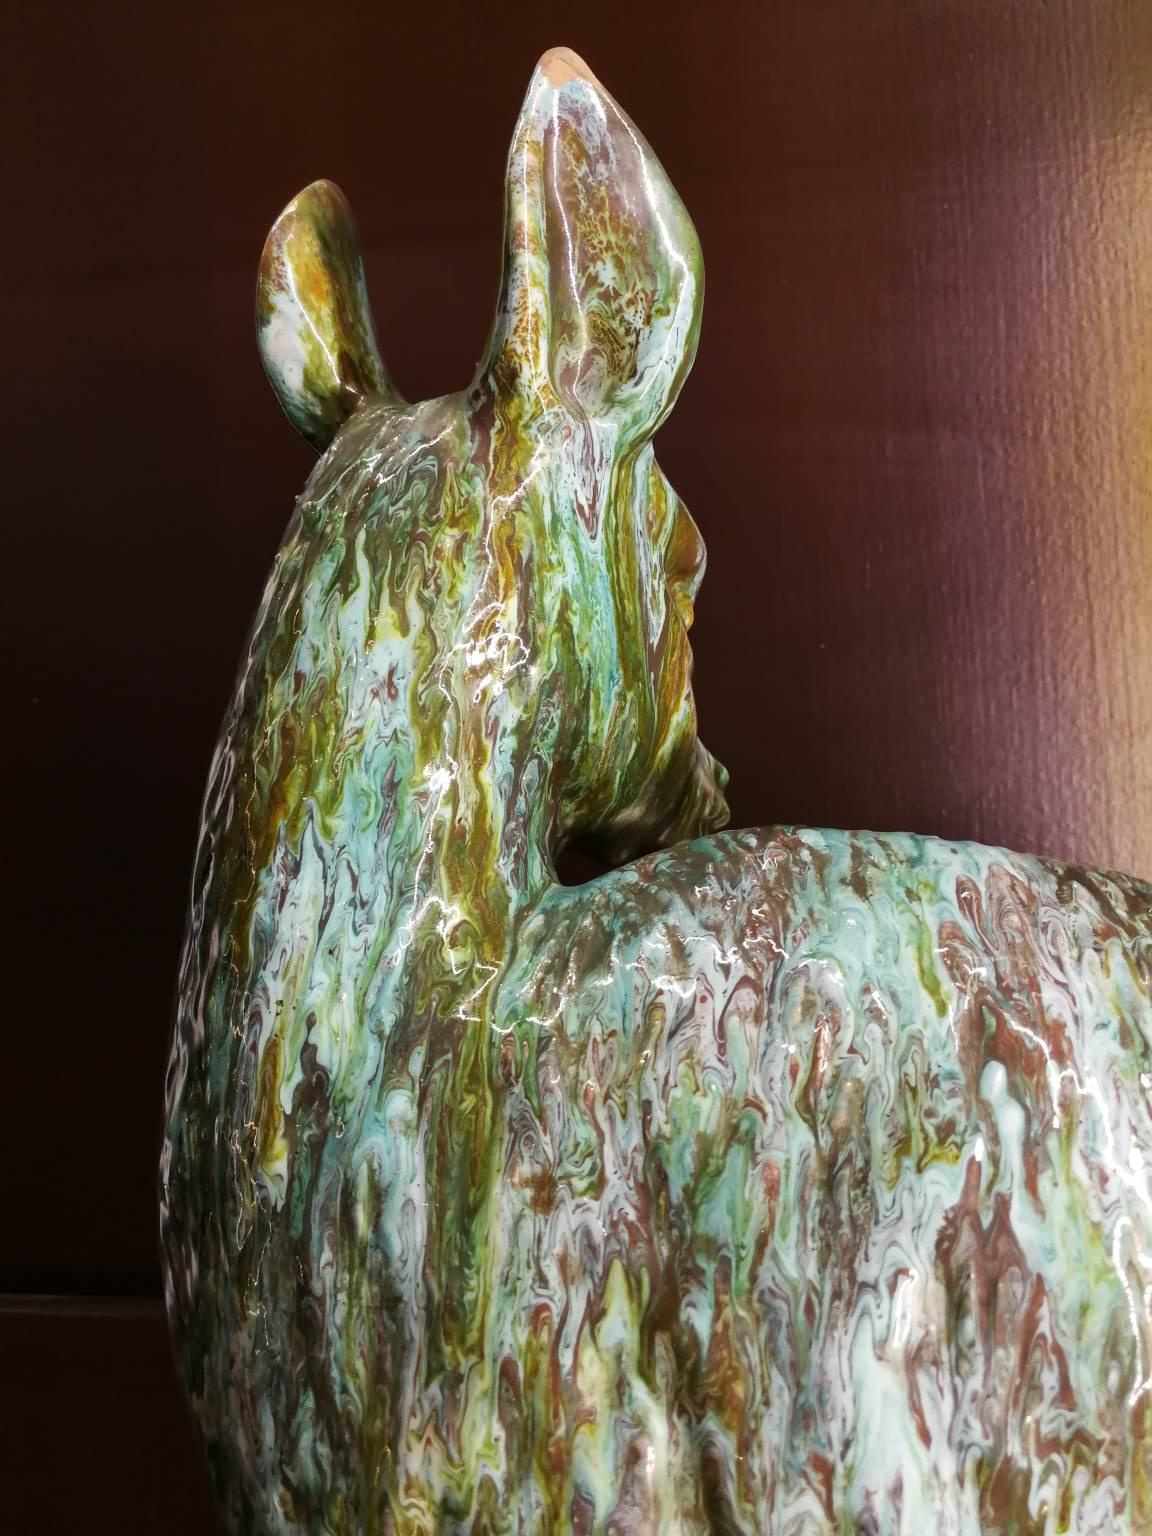 Italy Florence Ceramic Animal Goat Sculpture Signed Fantoni 20th century For Sale 3